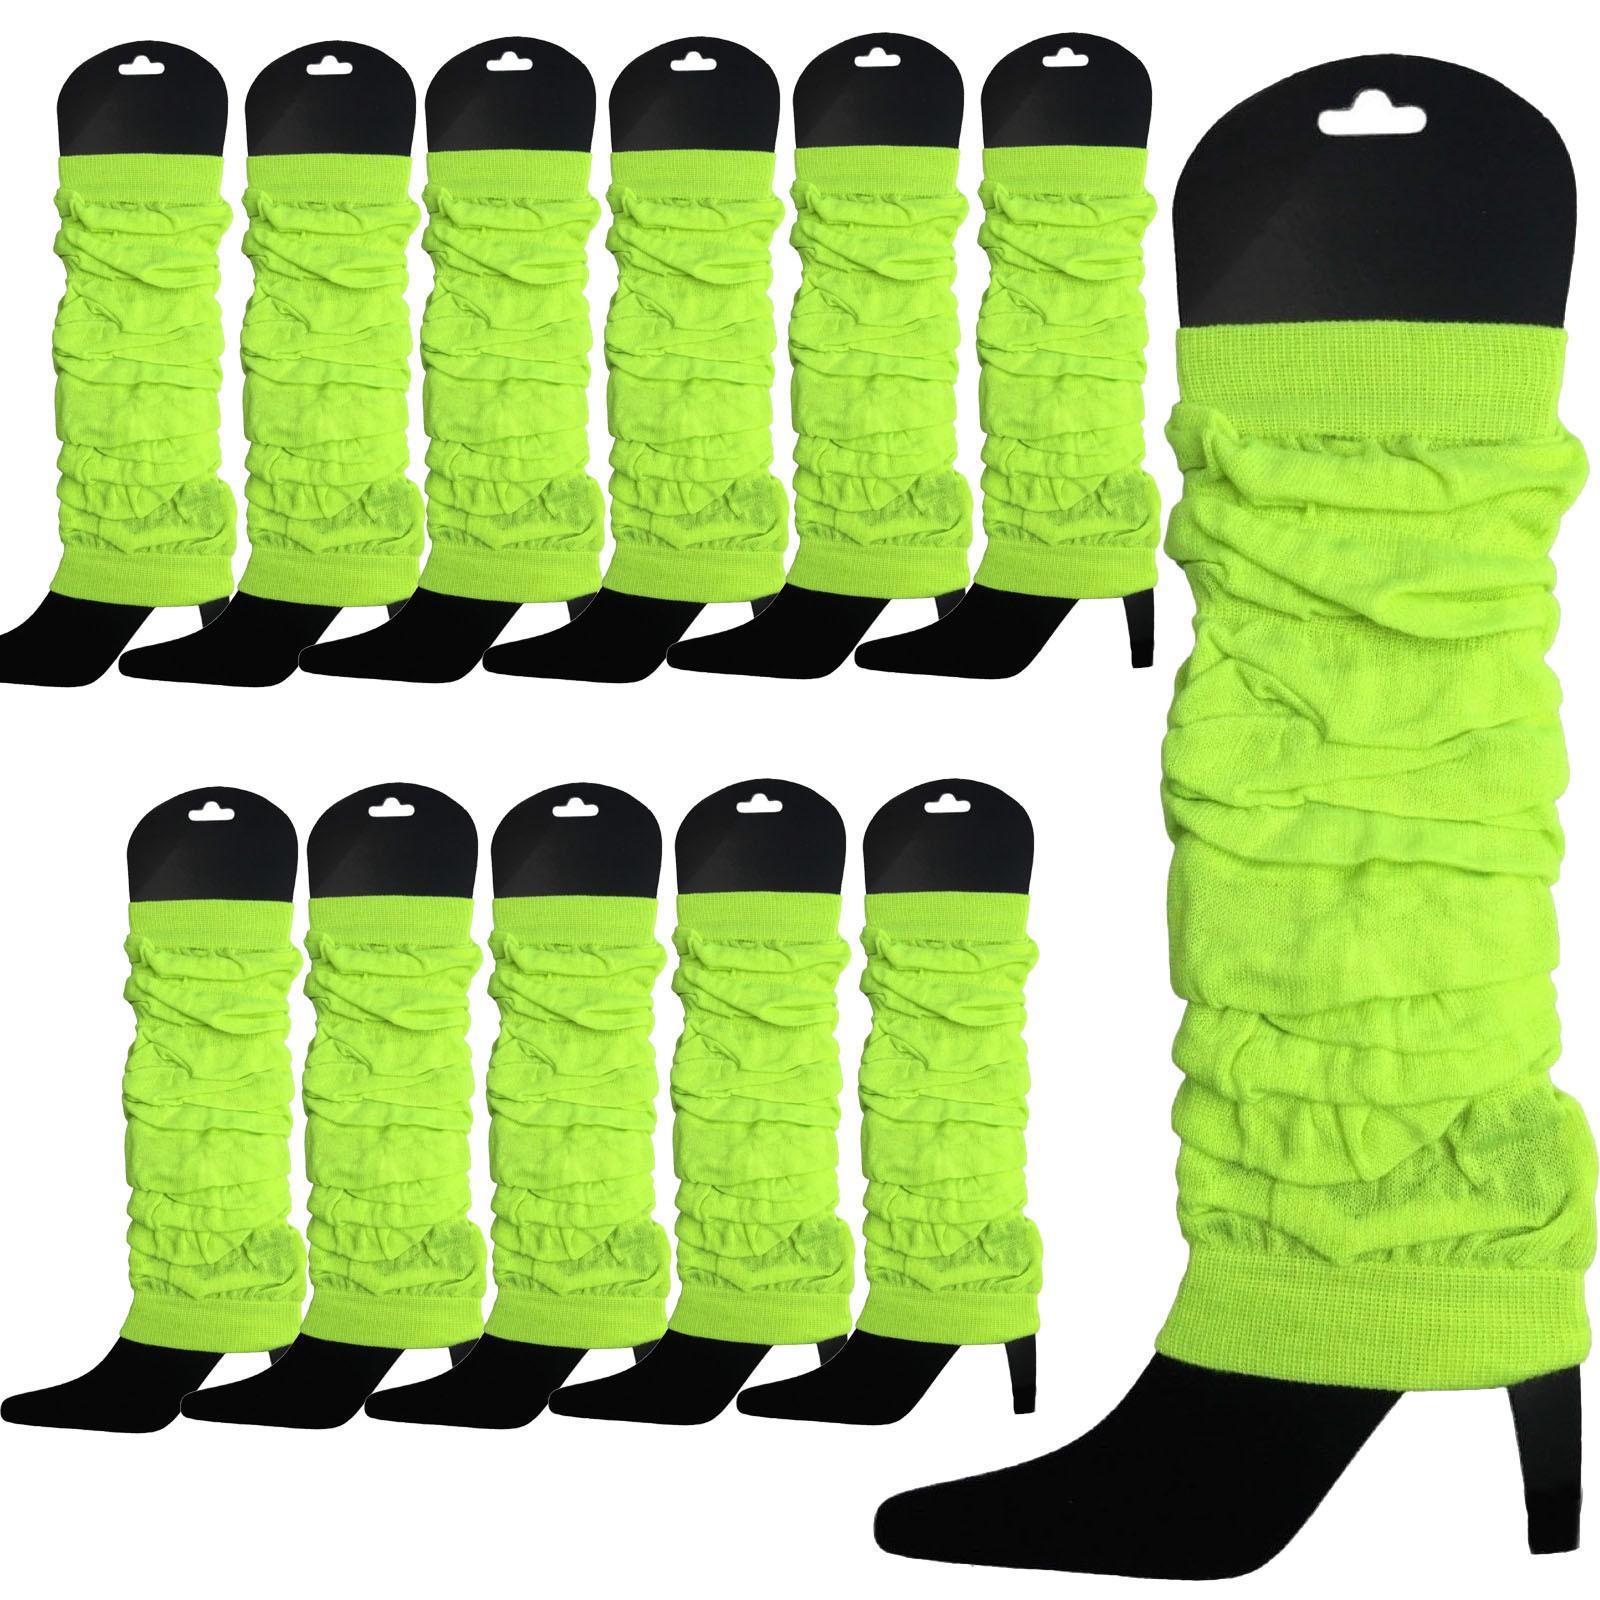 12 LEG WARMERS Knitted Womens Neon Party Knit Ankle Fluro Dance Costume 80s BULK - Fluro Yellow